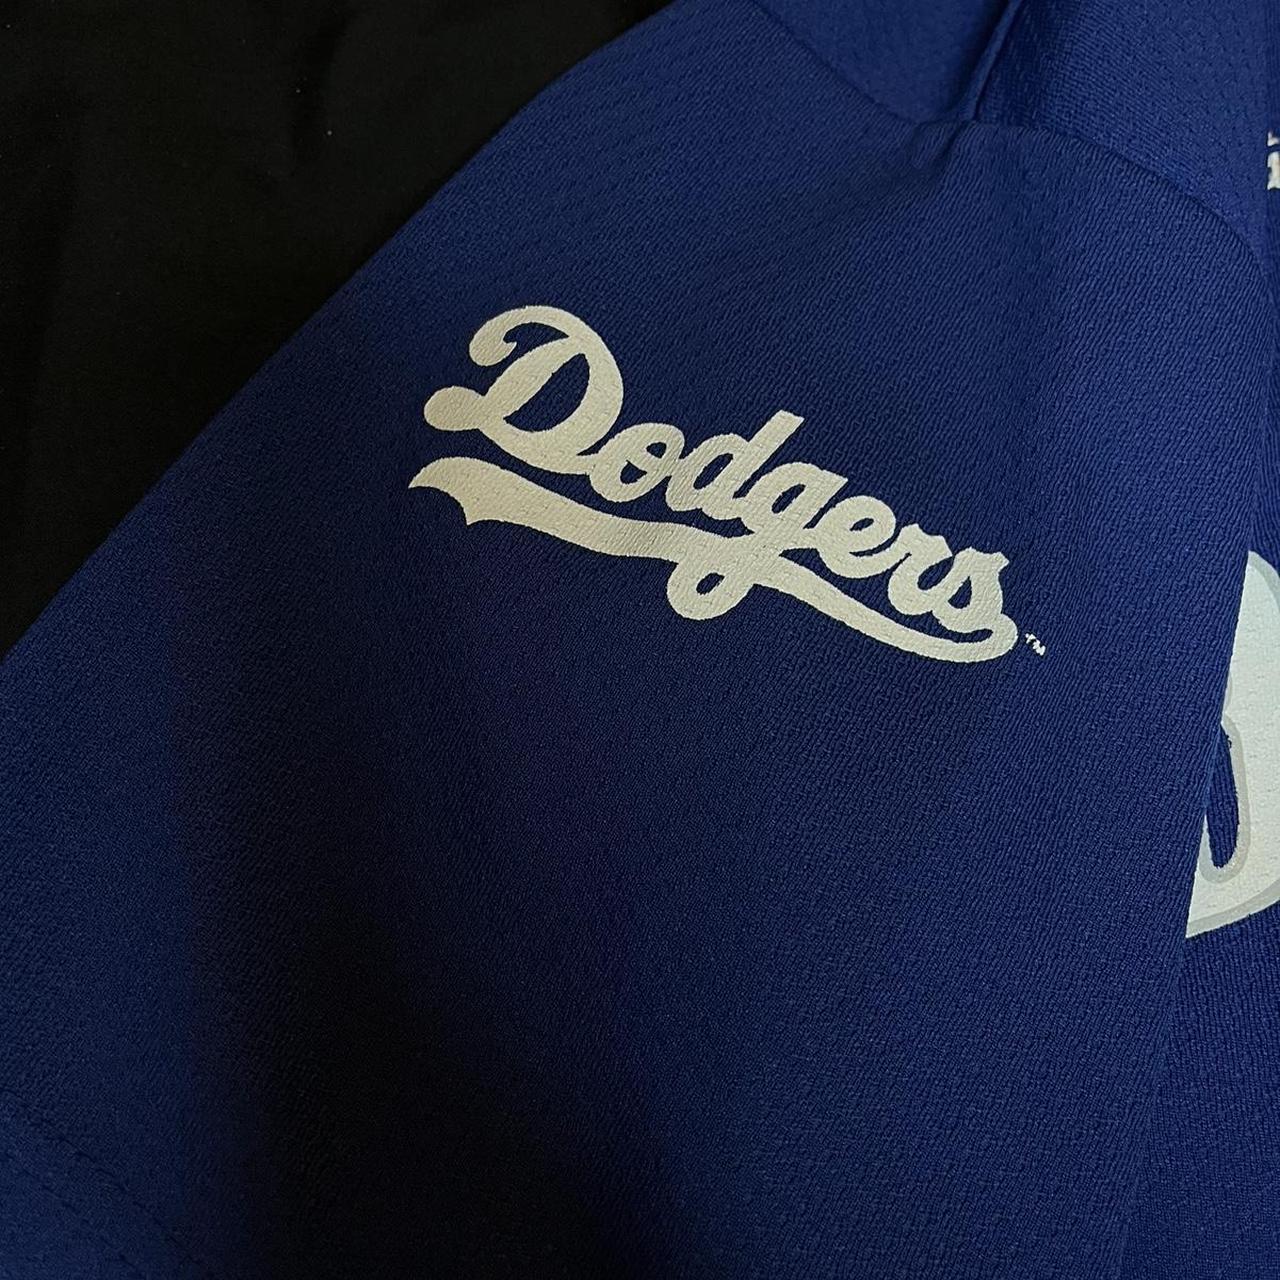 Los Angeles Dodgers Adidas button up Jersey was - Depop